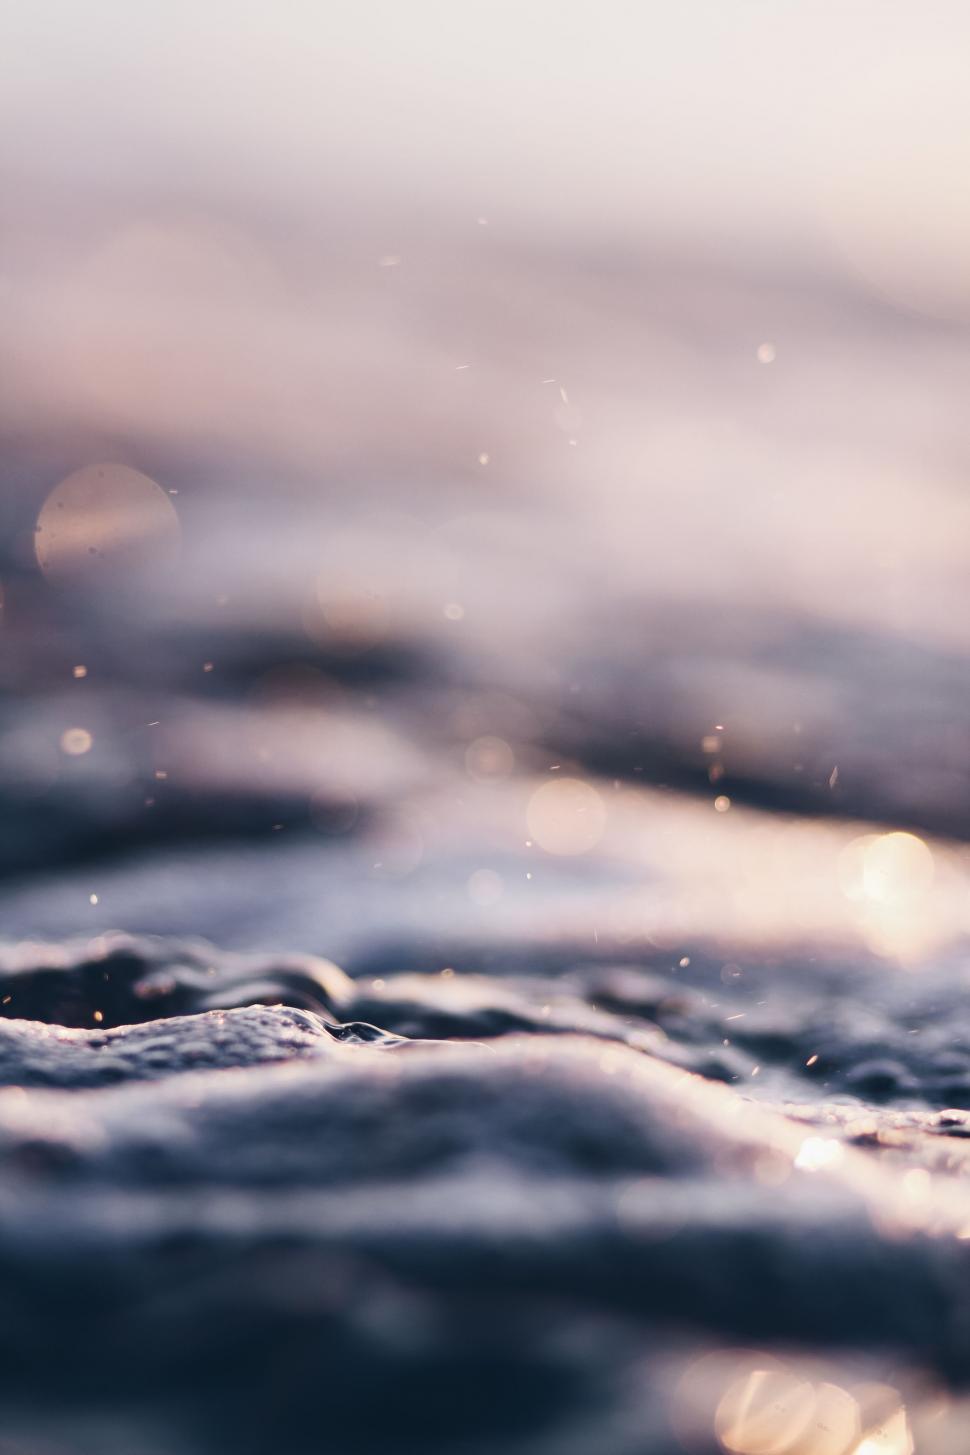 Free Image of Blurry Water Ripples With Background Blur 